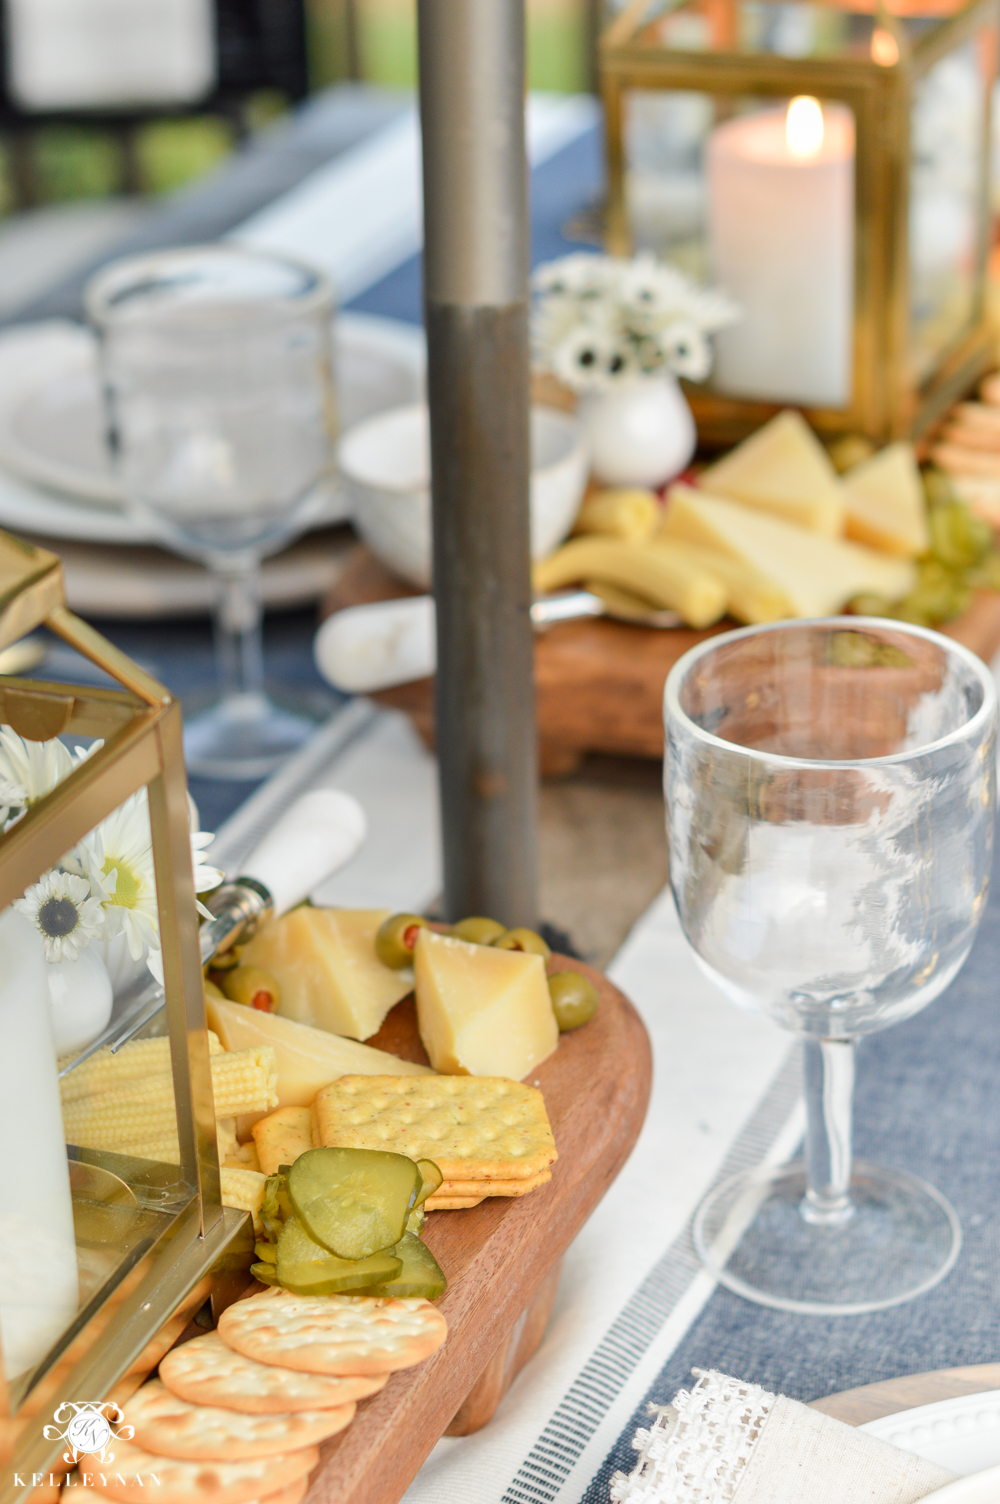 Outdoor Entertaining and Table Ideas with Cheese board appetizer centerpieces- wooden paddle boards as outdoor table centerpieces